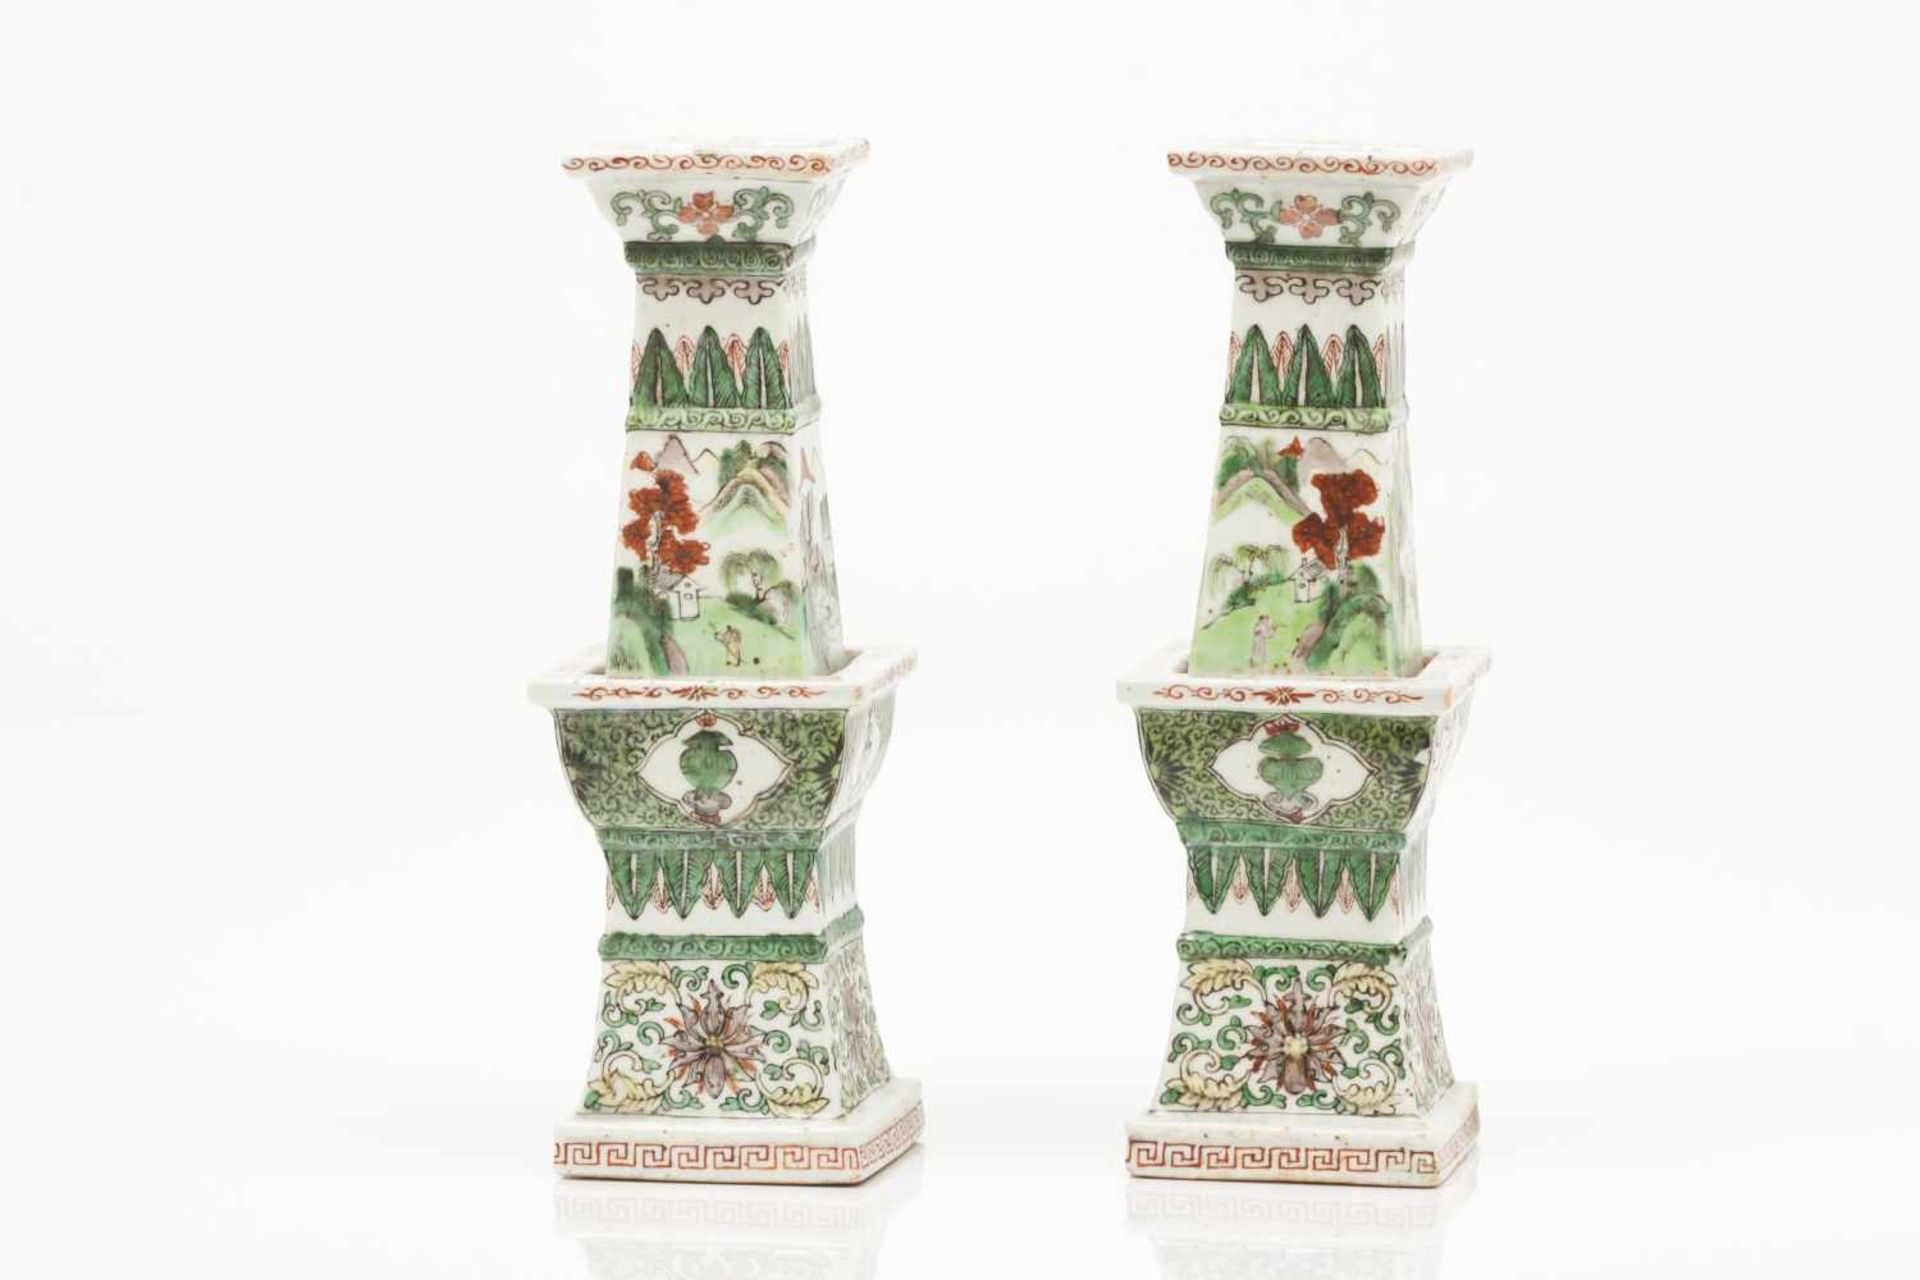 A pair of incense burners/candle stands